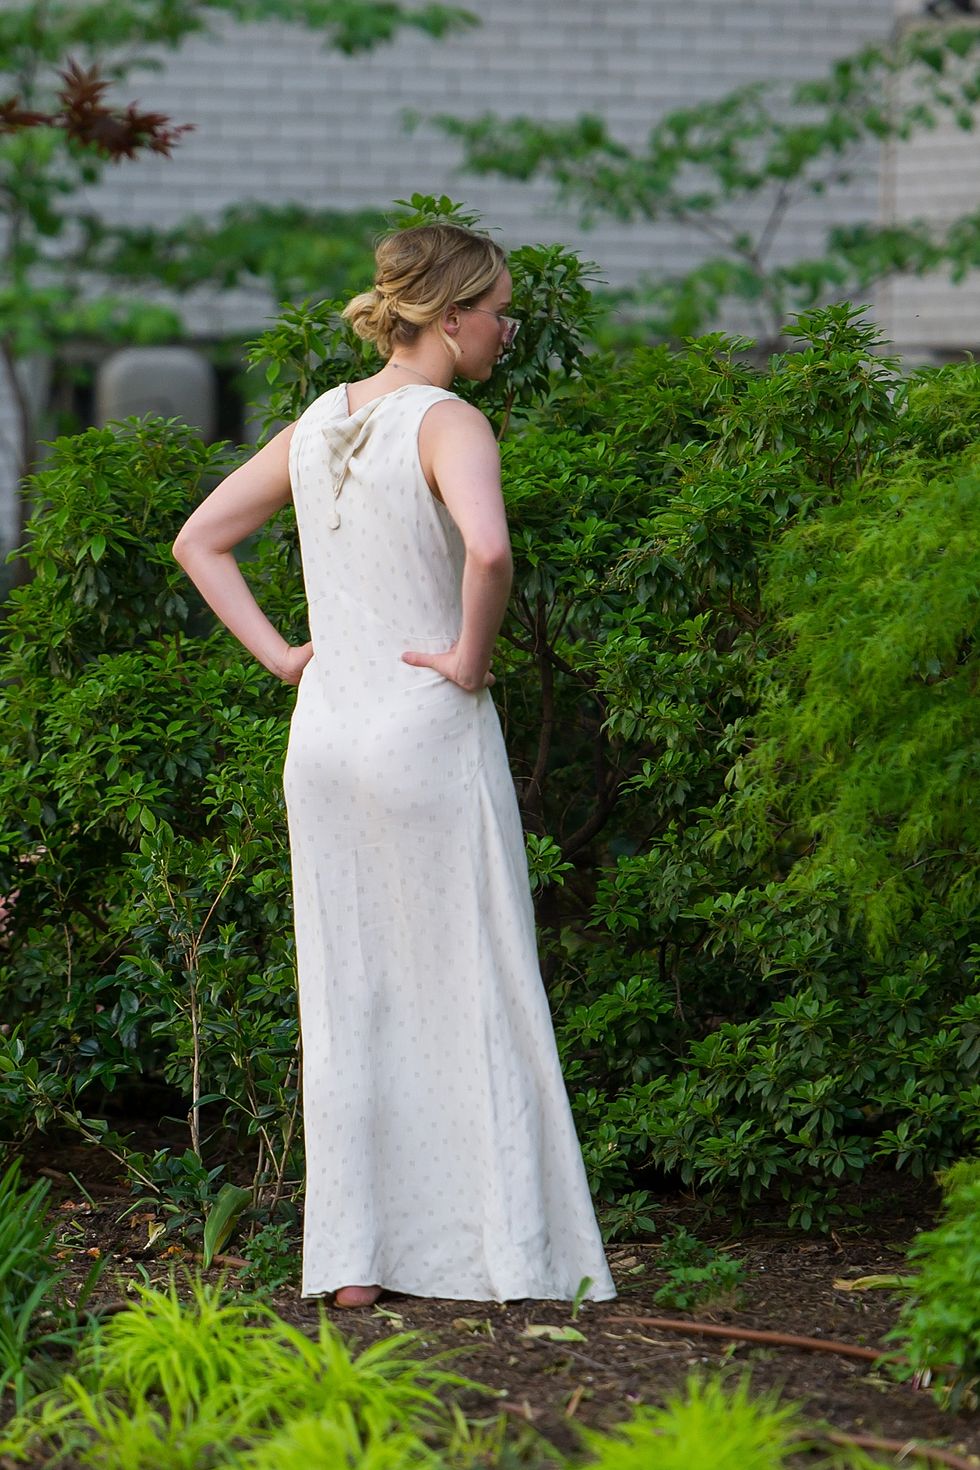 People in nature, Dress, Clothing, White, Hair, Photograph, Green, Bridal party dress, Shoulder, Grass, 